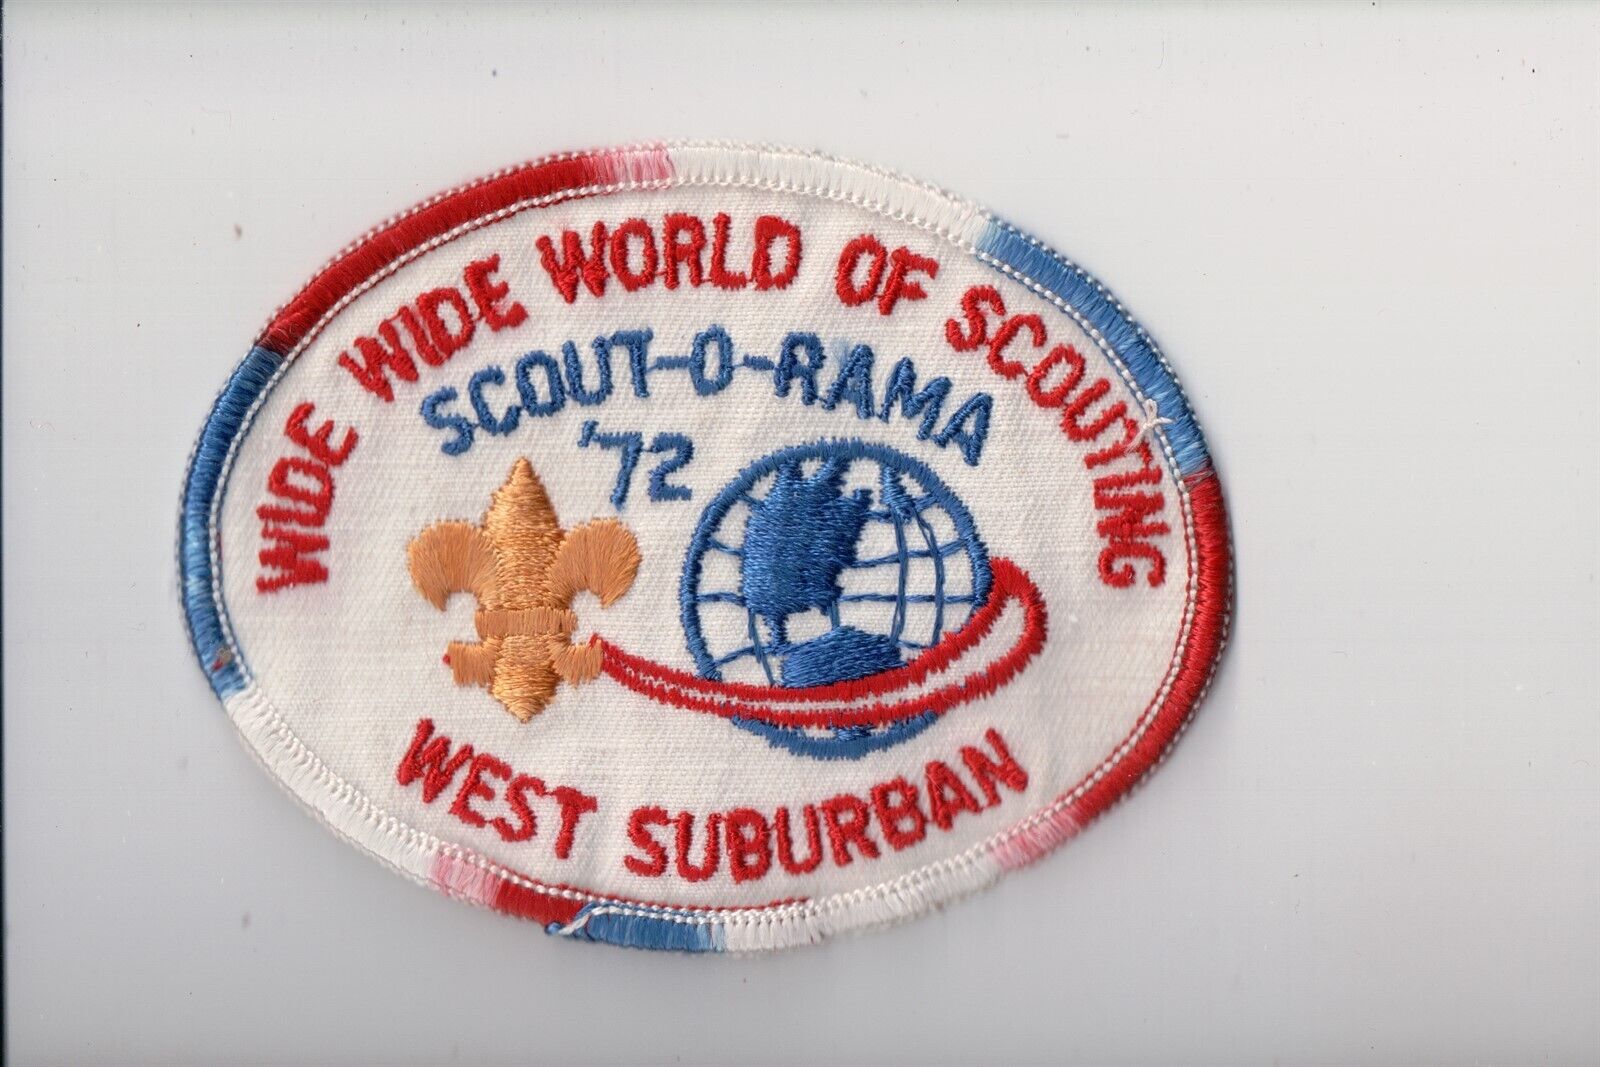 1972 West Suburban Wide Wide World Of Scouting Scout-O-Rama patch